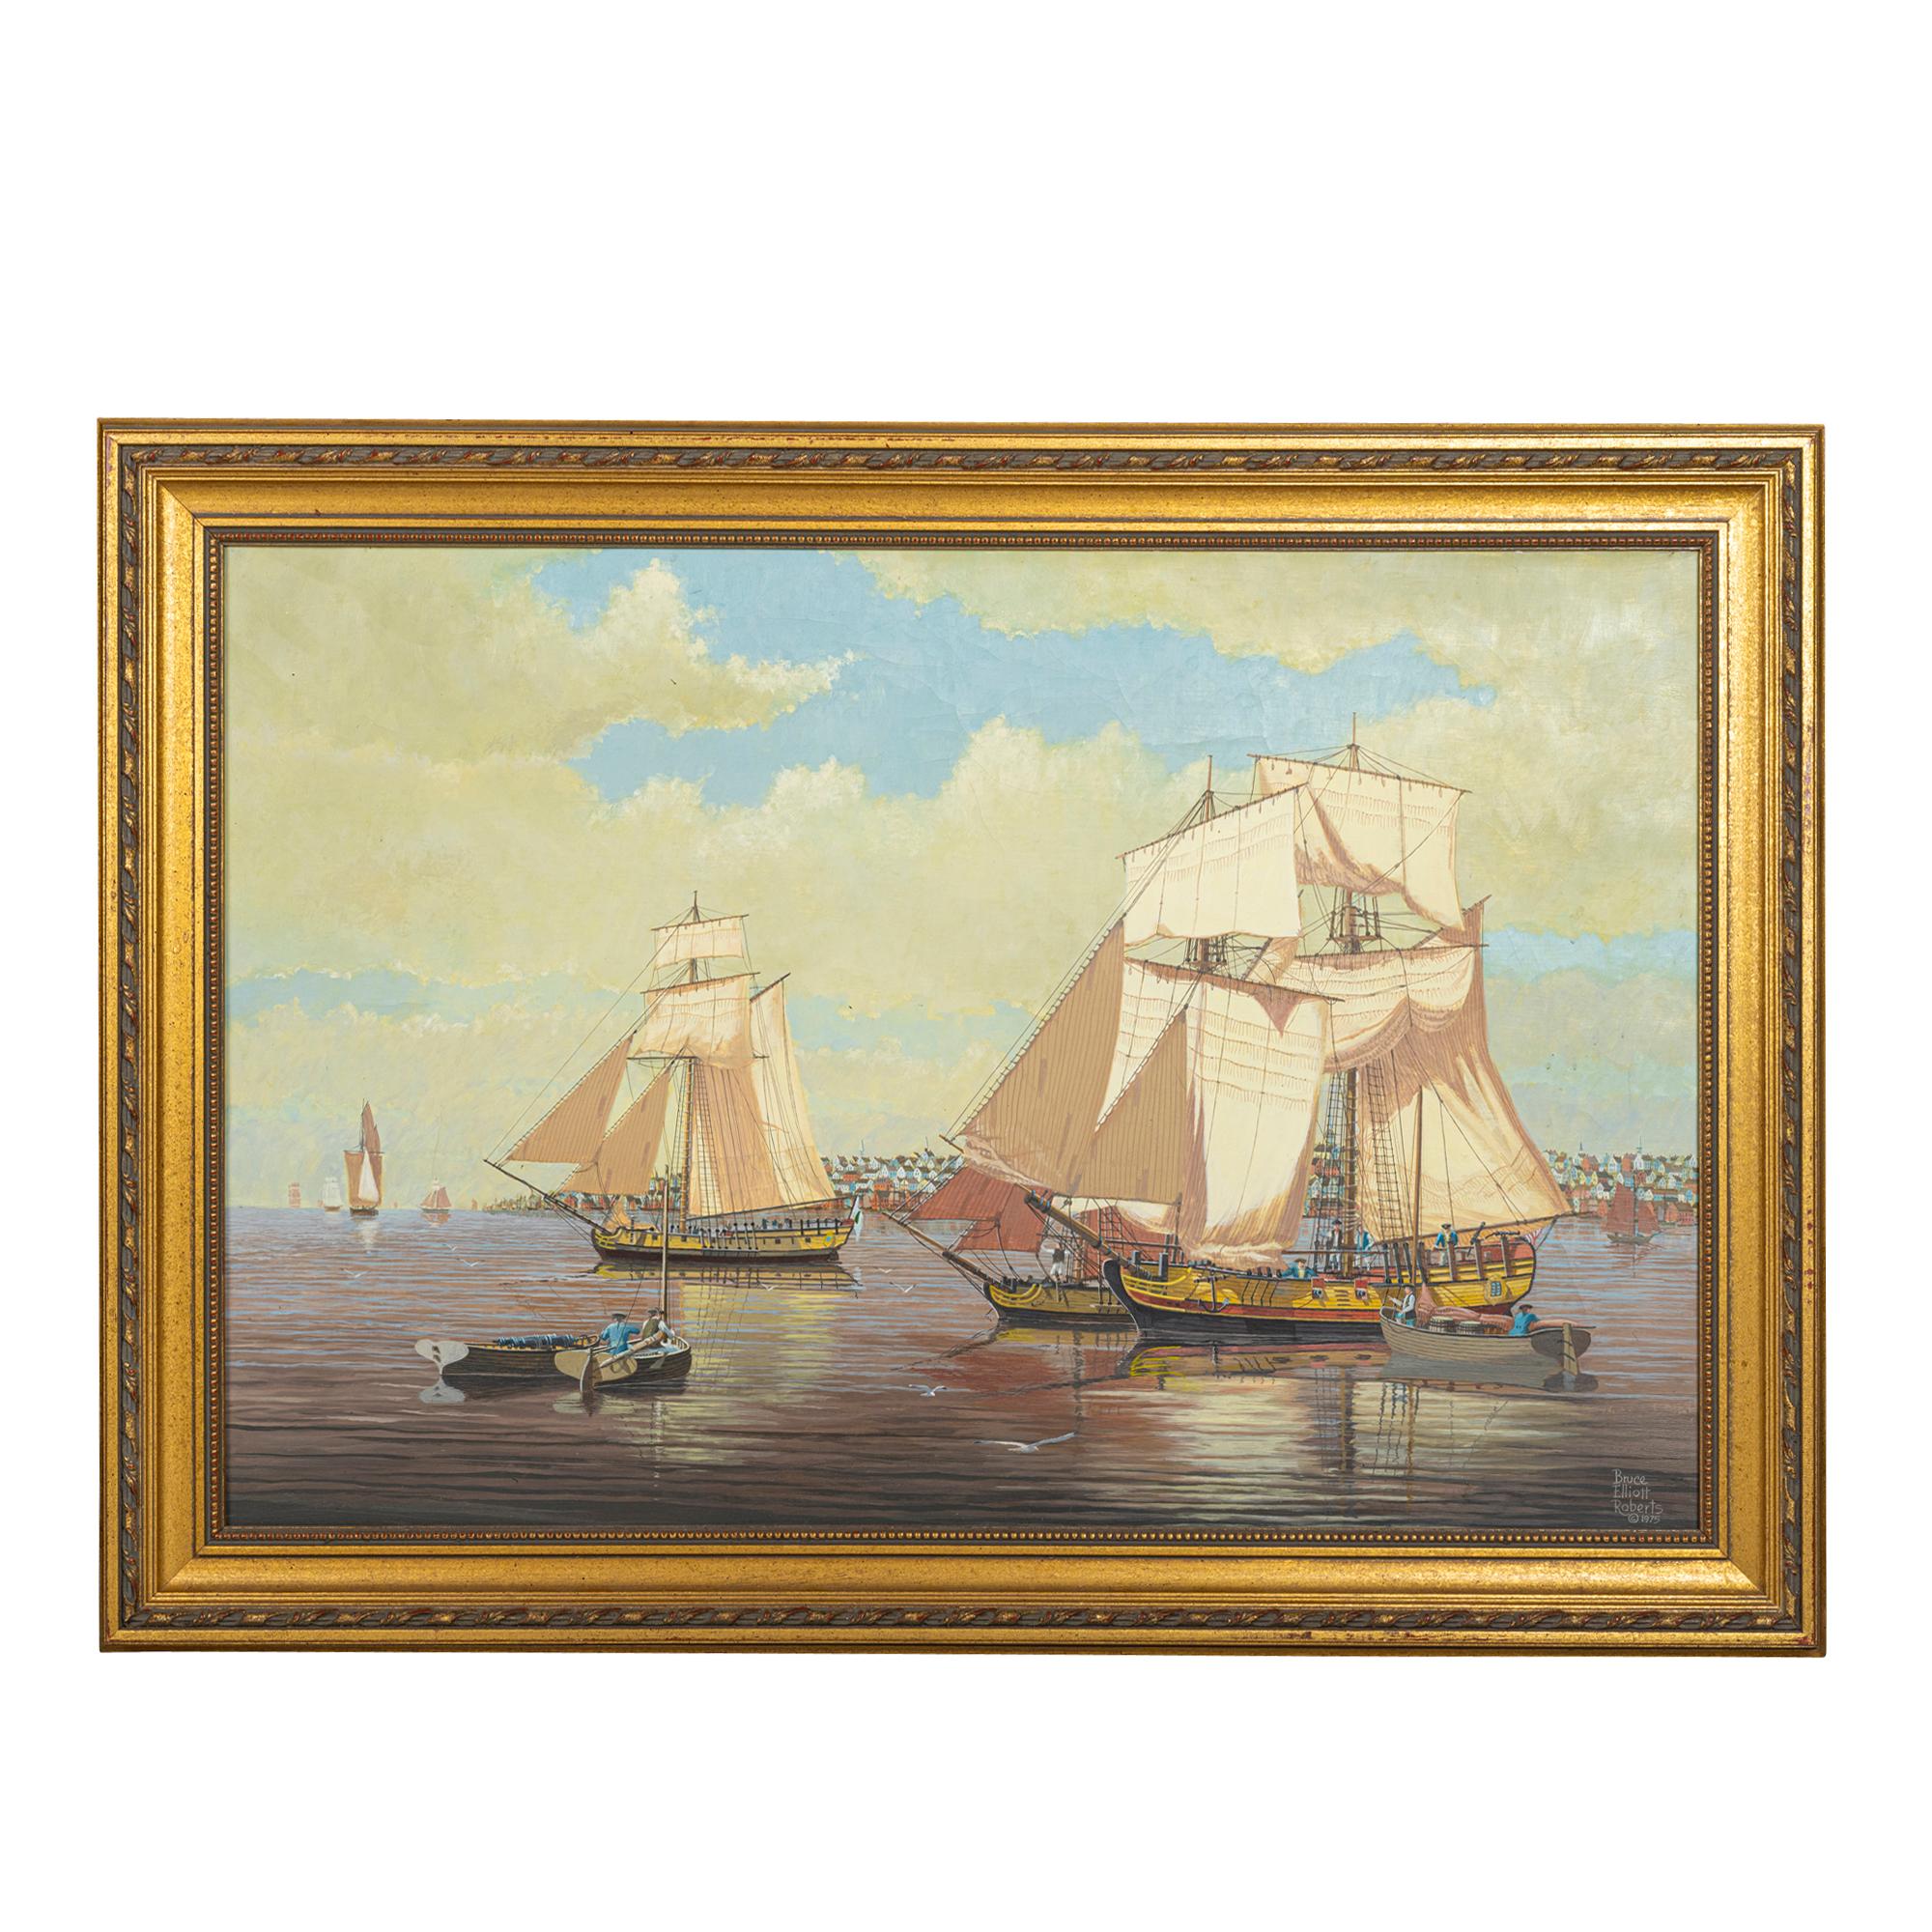 Bruce Elliot Roberts
(American B. 1910)

Boston, Stronghold Of The American Revolution

signed Bruce Elliot Roberts and dated 1975 (lower right) 
signed, titled and dated (on the stretcher and on reverse)

Oil on canvas
24 by 36 in. 
60.96